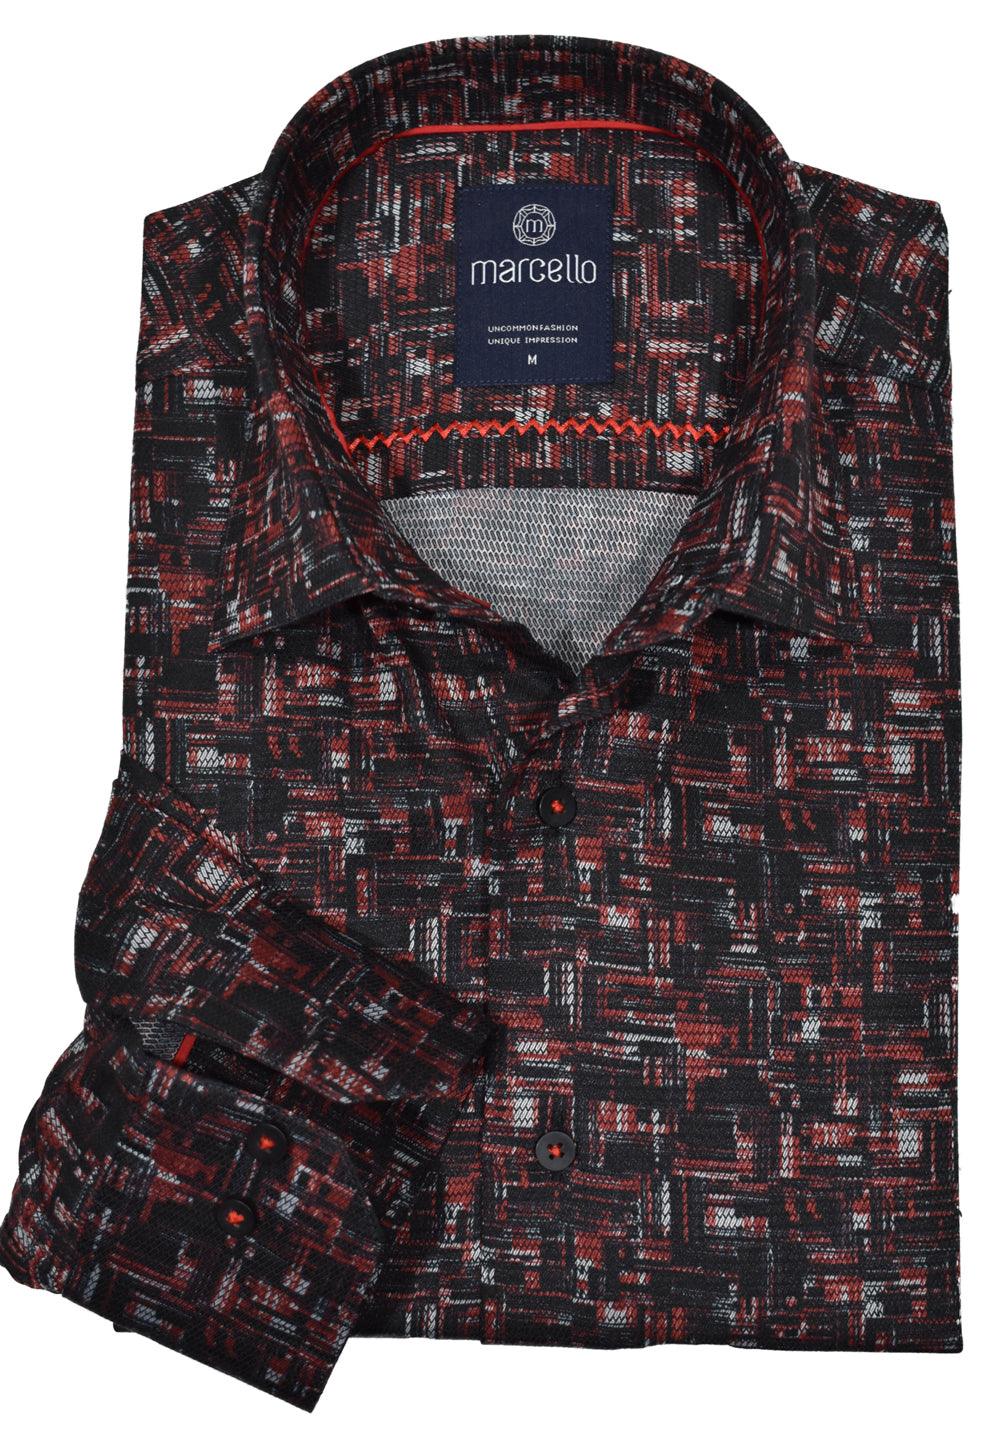 Following up on one of our most popular sport shirts, the rich, neat geometric pattern mixing black and red looks spectacular for any event. Accent detailing, a medium spread collar and cotton microfiber easy care fabric. Modern fit. Frais Shaded Shirt  Accent stitching brings out color. Soft cotton fabric with microfiber for easy care. Medium spread collar. Modern fit.